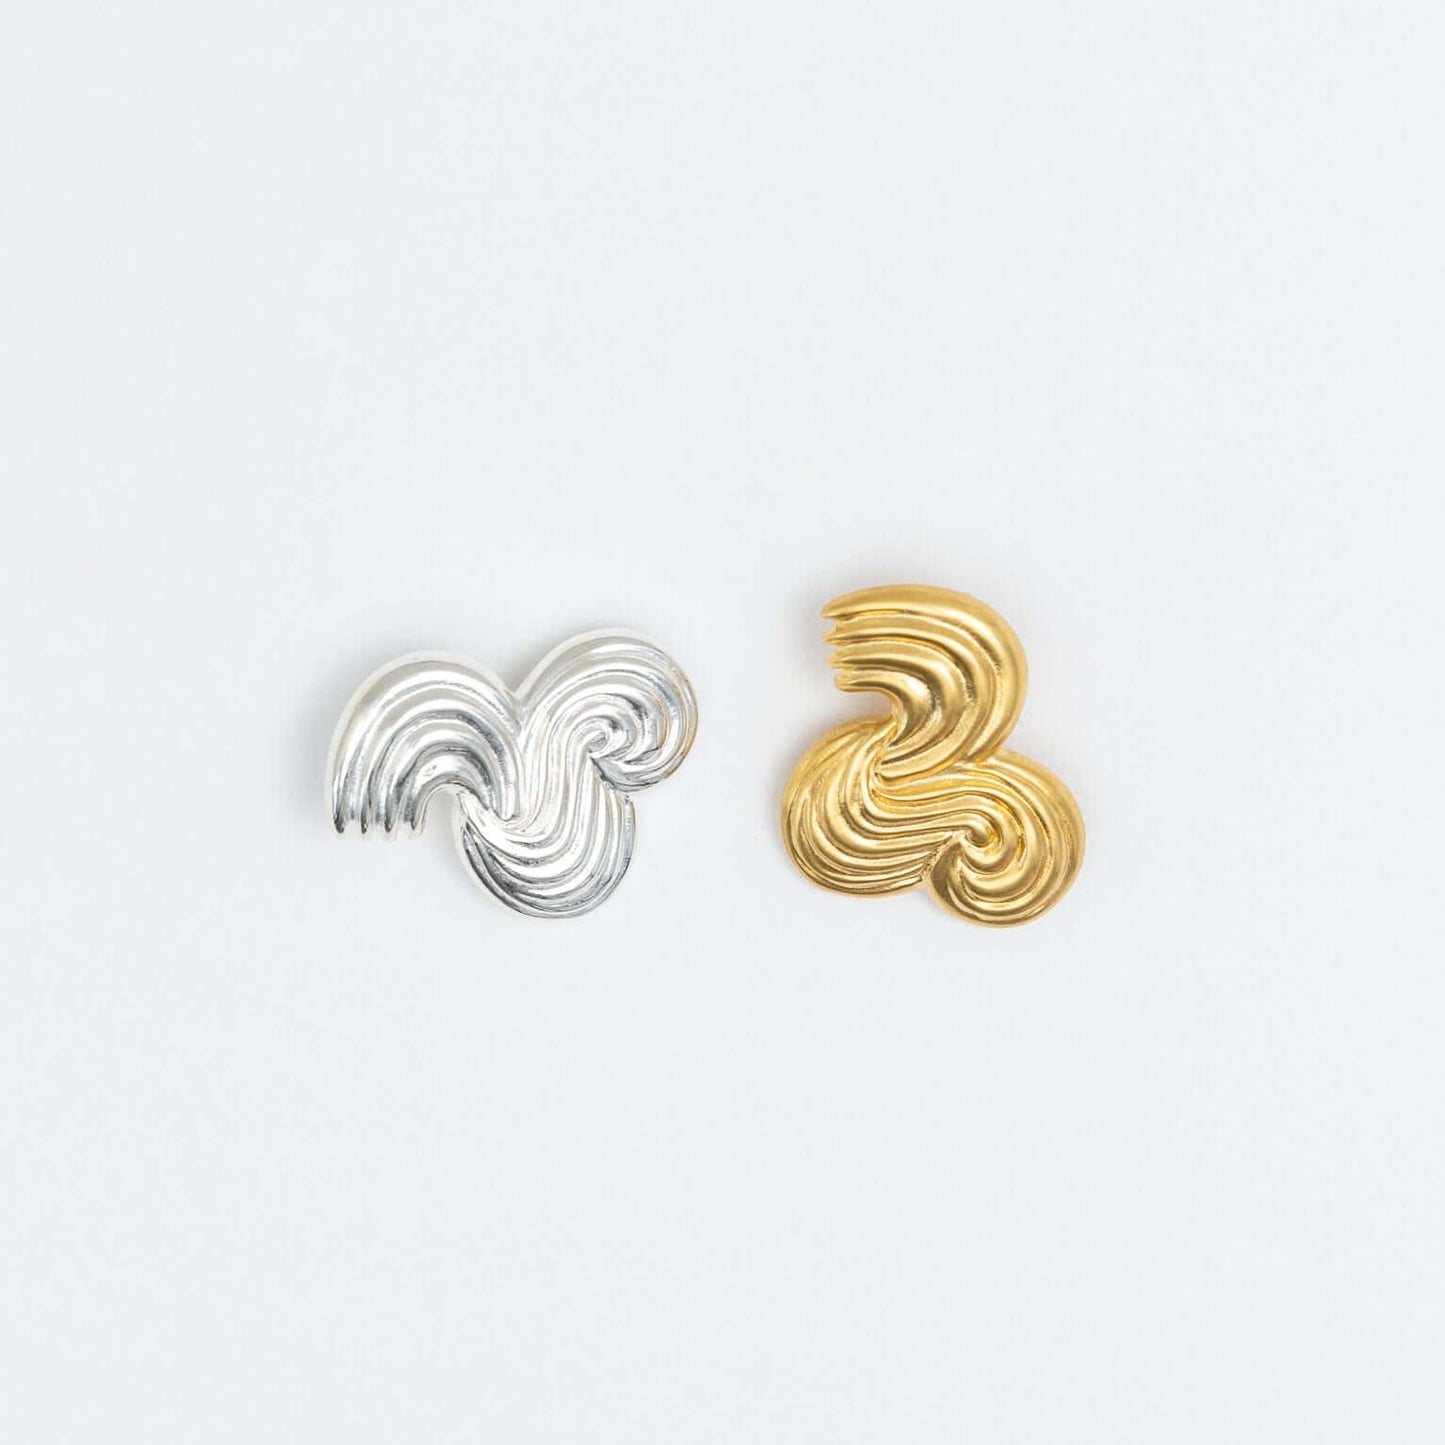 One silver and one gold earring, same design